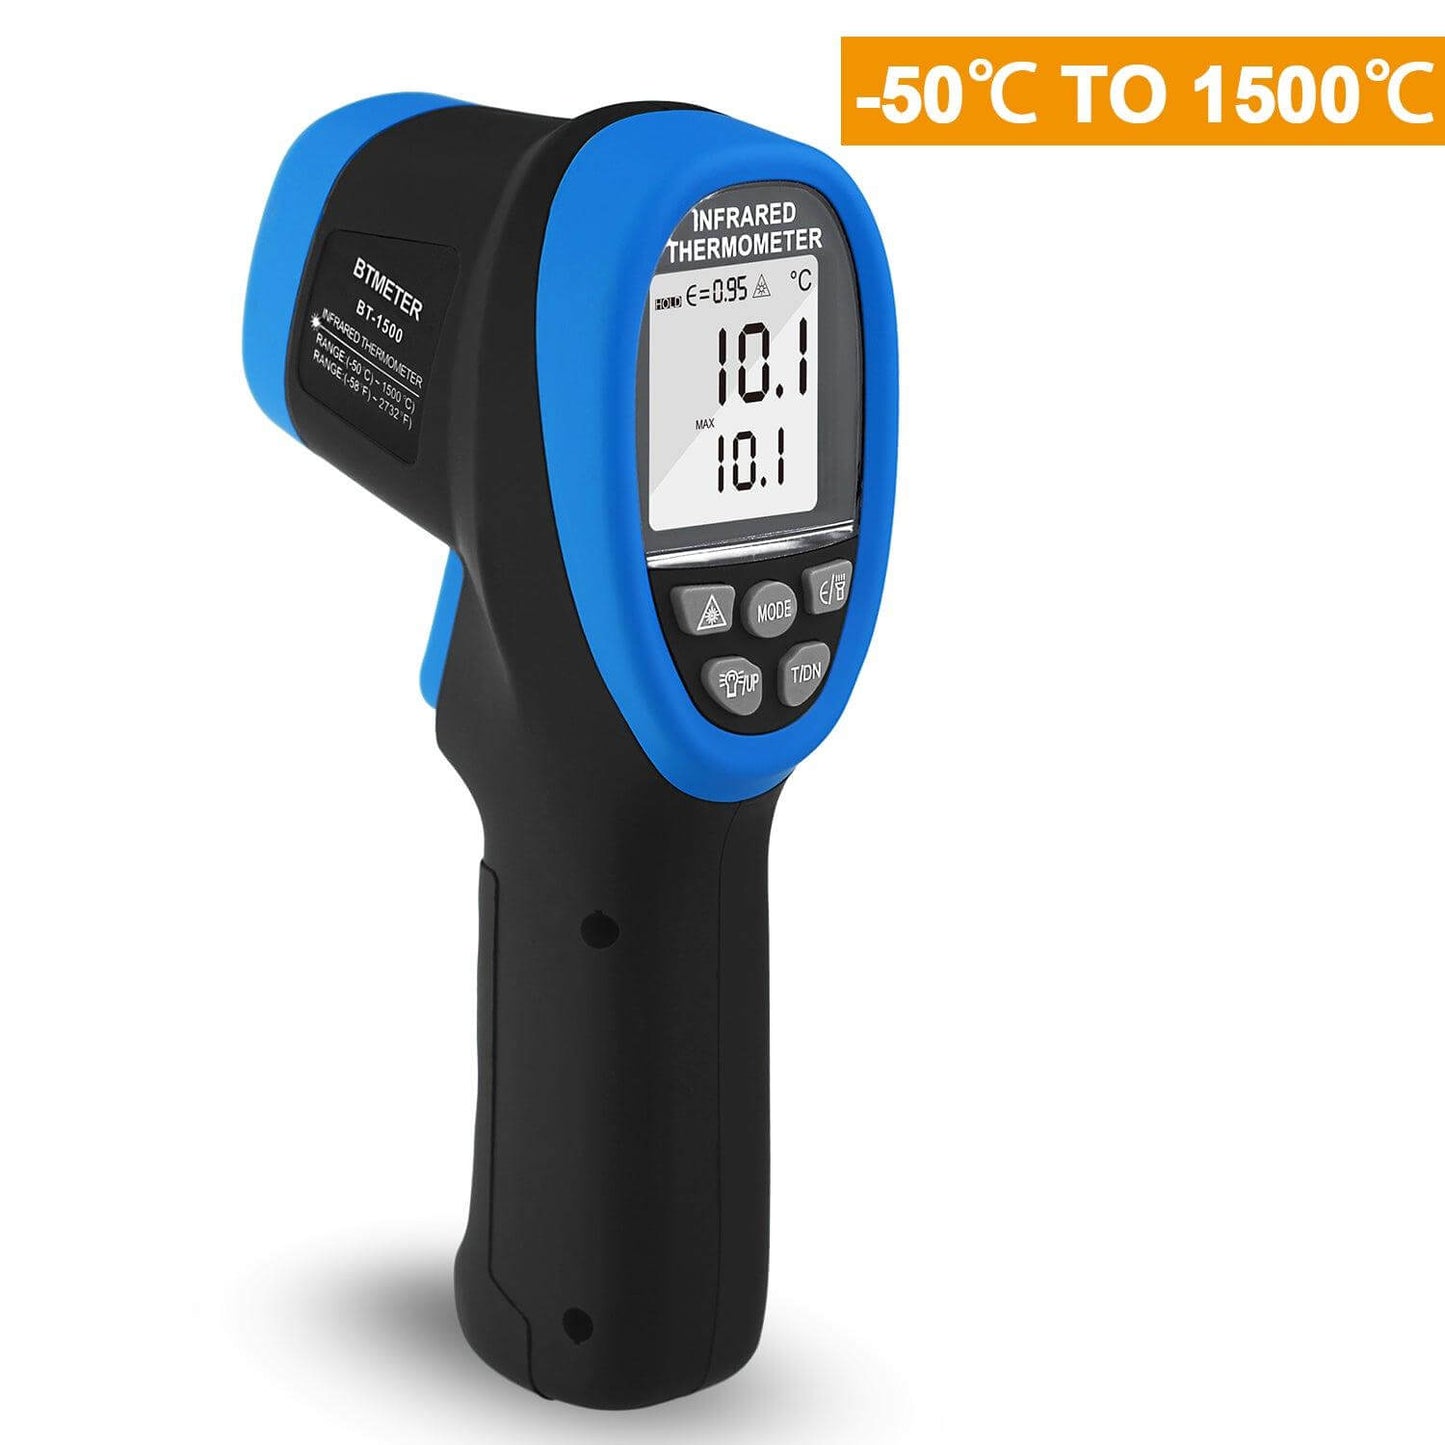  infrared thermometer